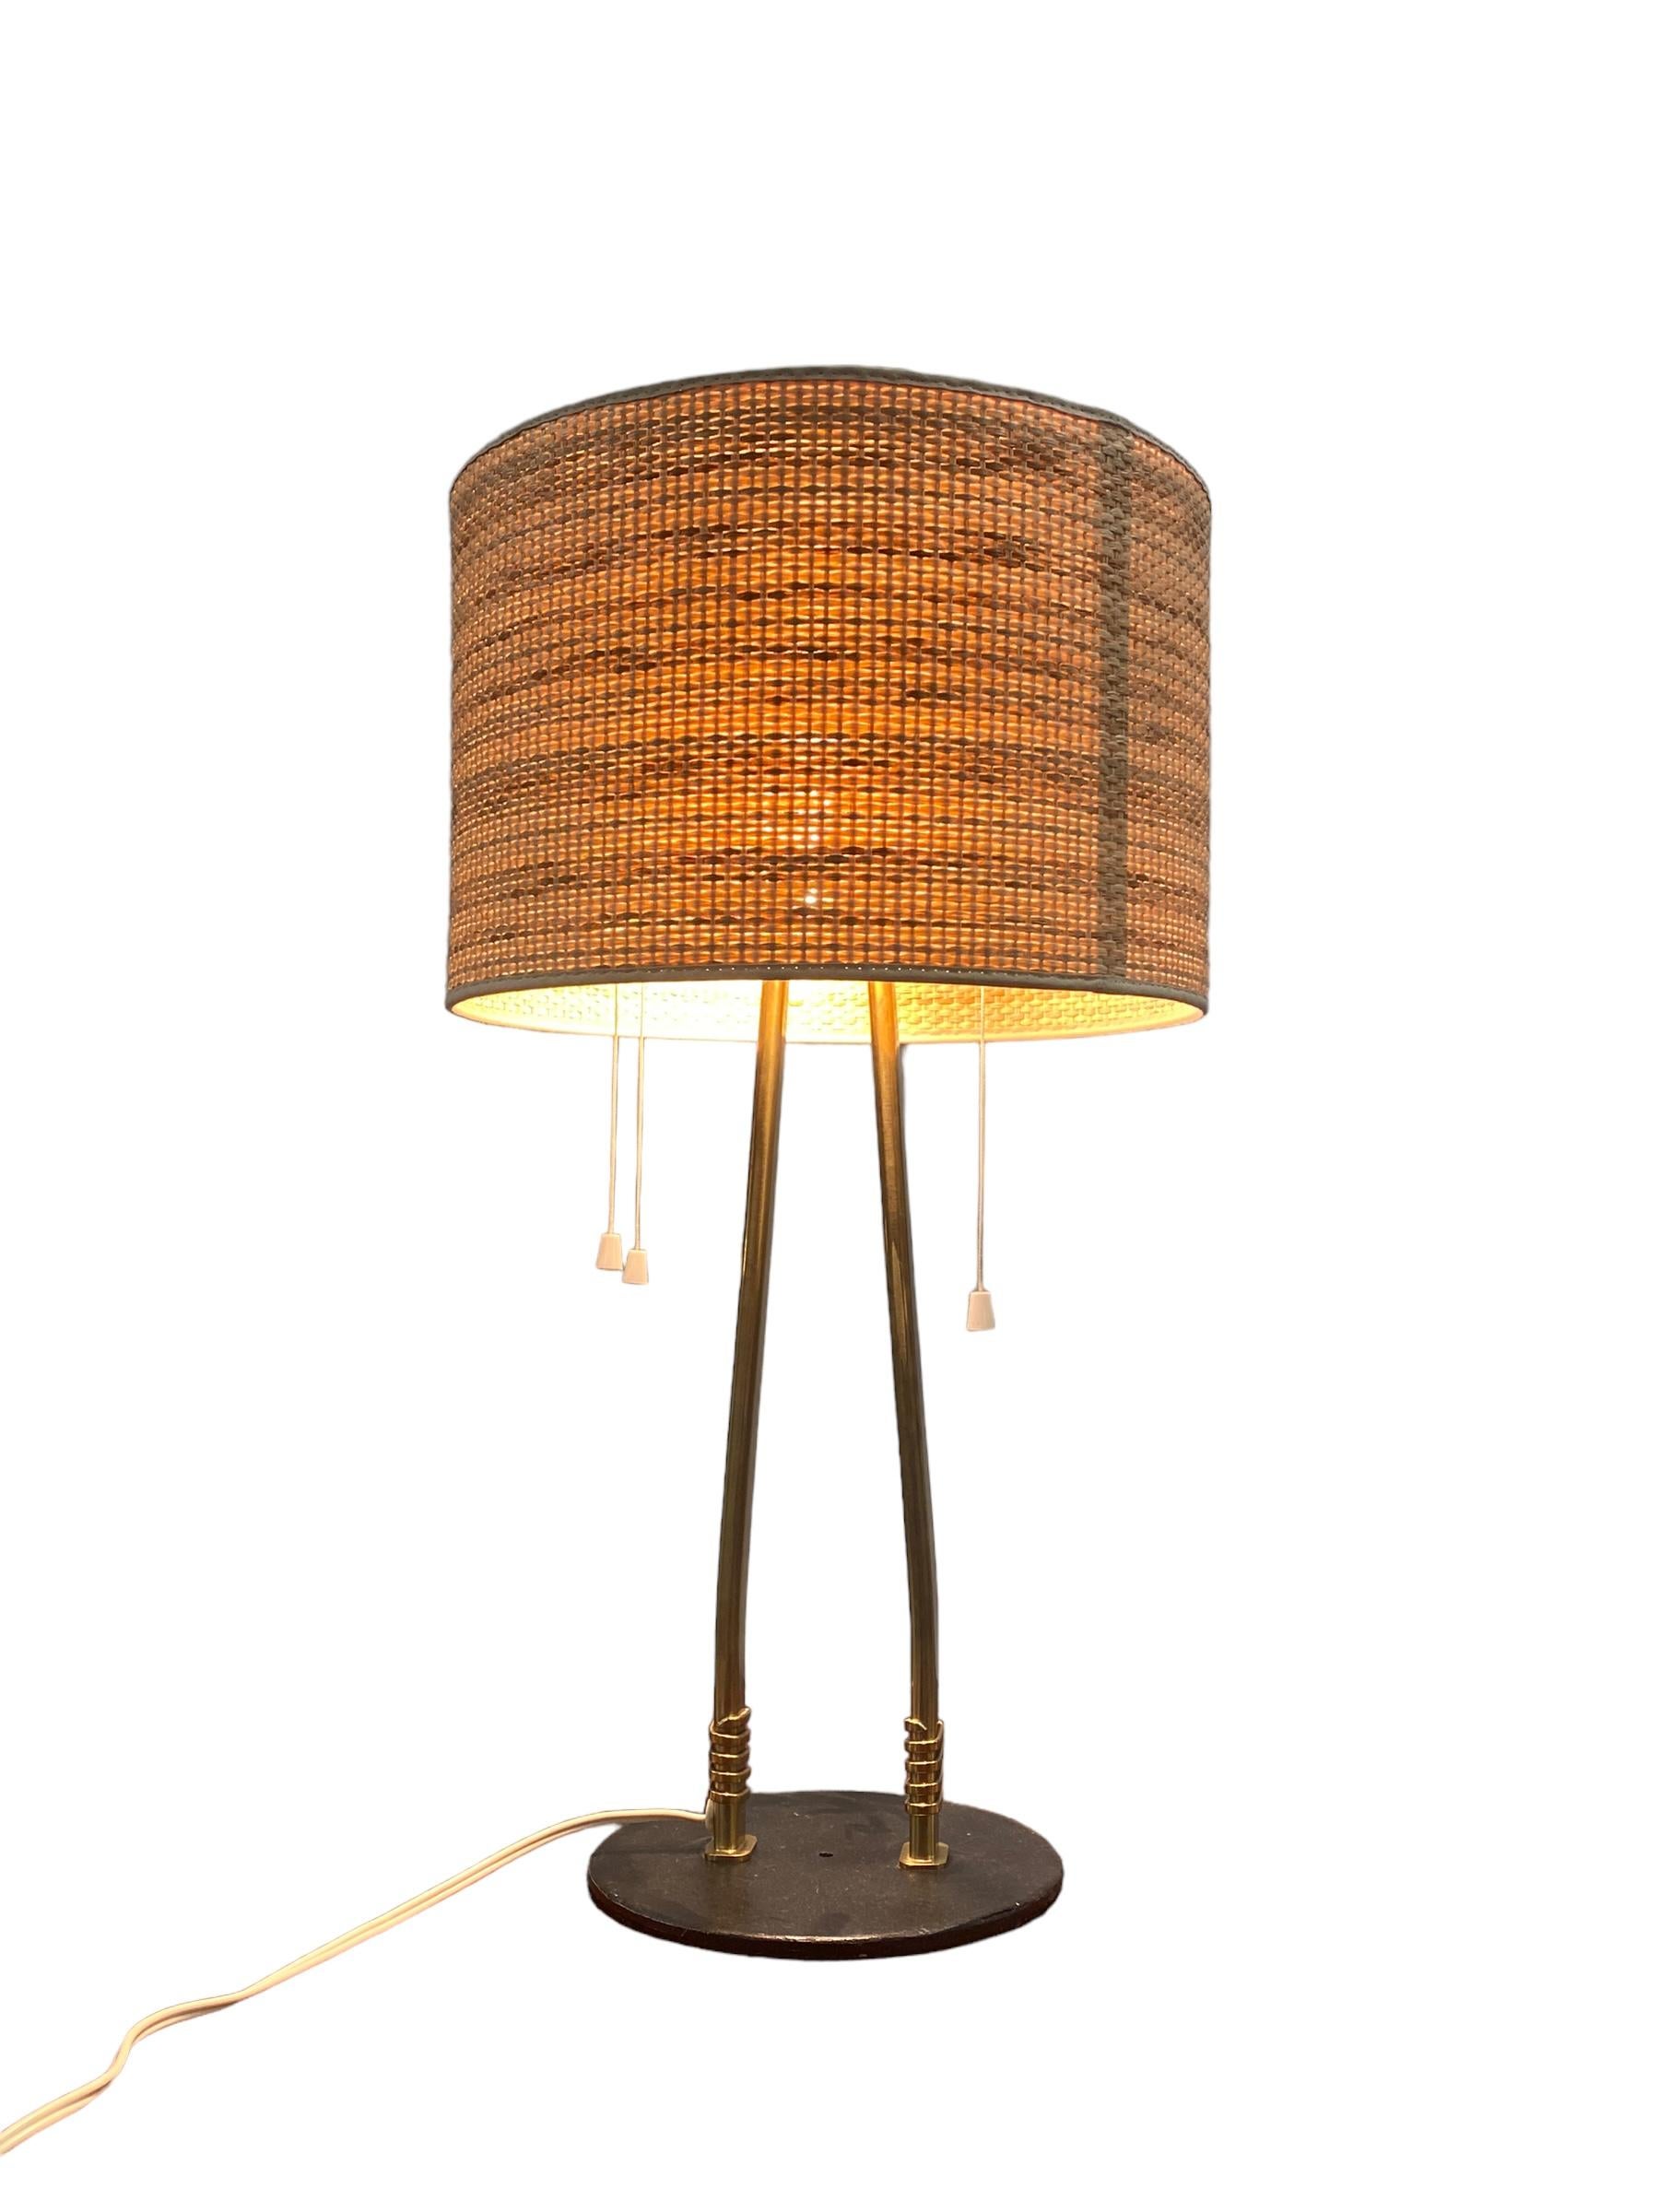 Scandinavian Modern Paavo Tynell Commissioned Table Lamp, Taito For Sale